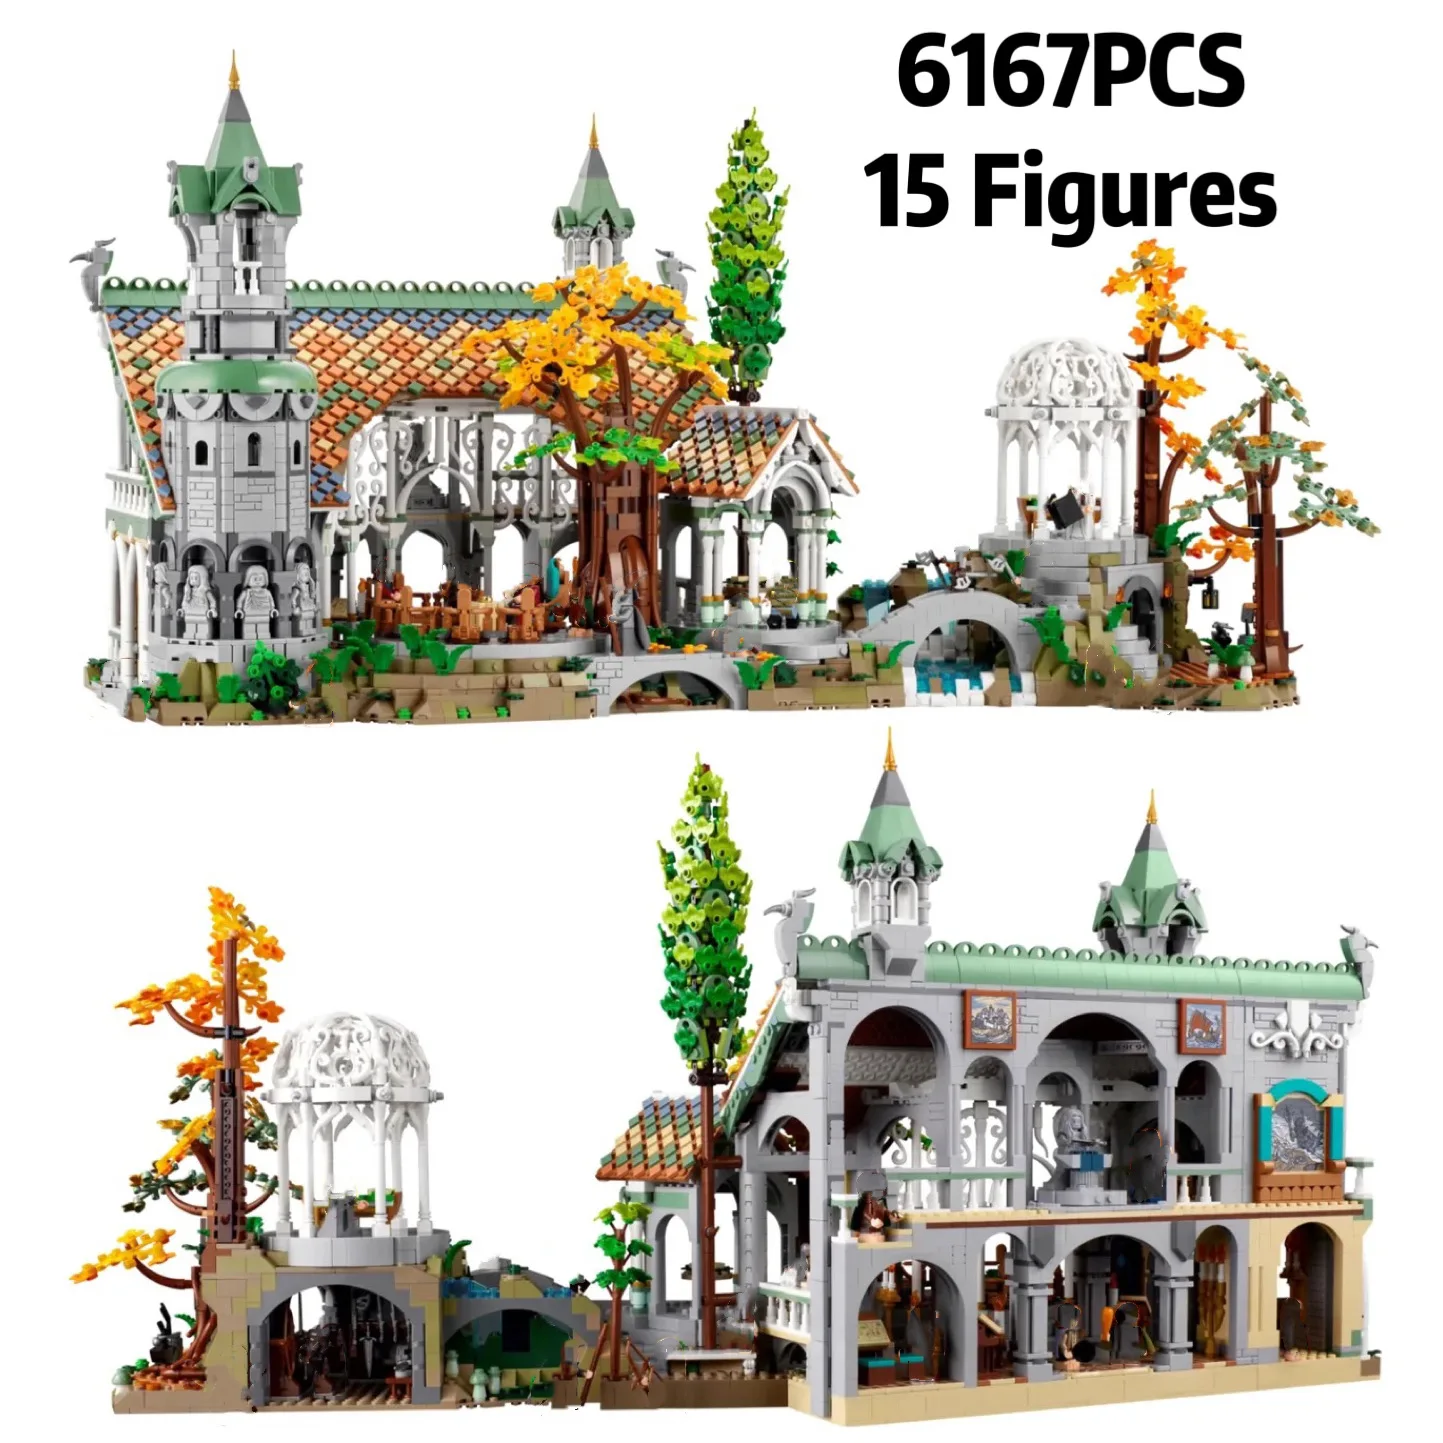 

NEW IN STOCK 6167Pcs Famous Movie Rivendell 10316 Lorded of the Rings Castle Building Blocks Bricks Toys Adults Christmas Gifts